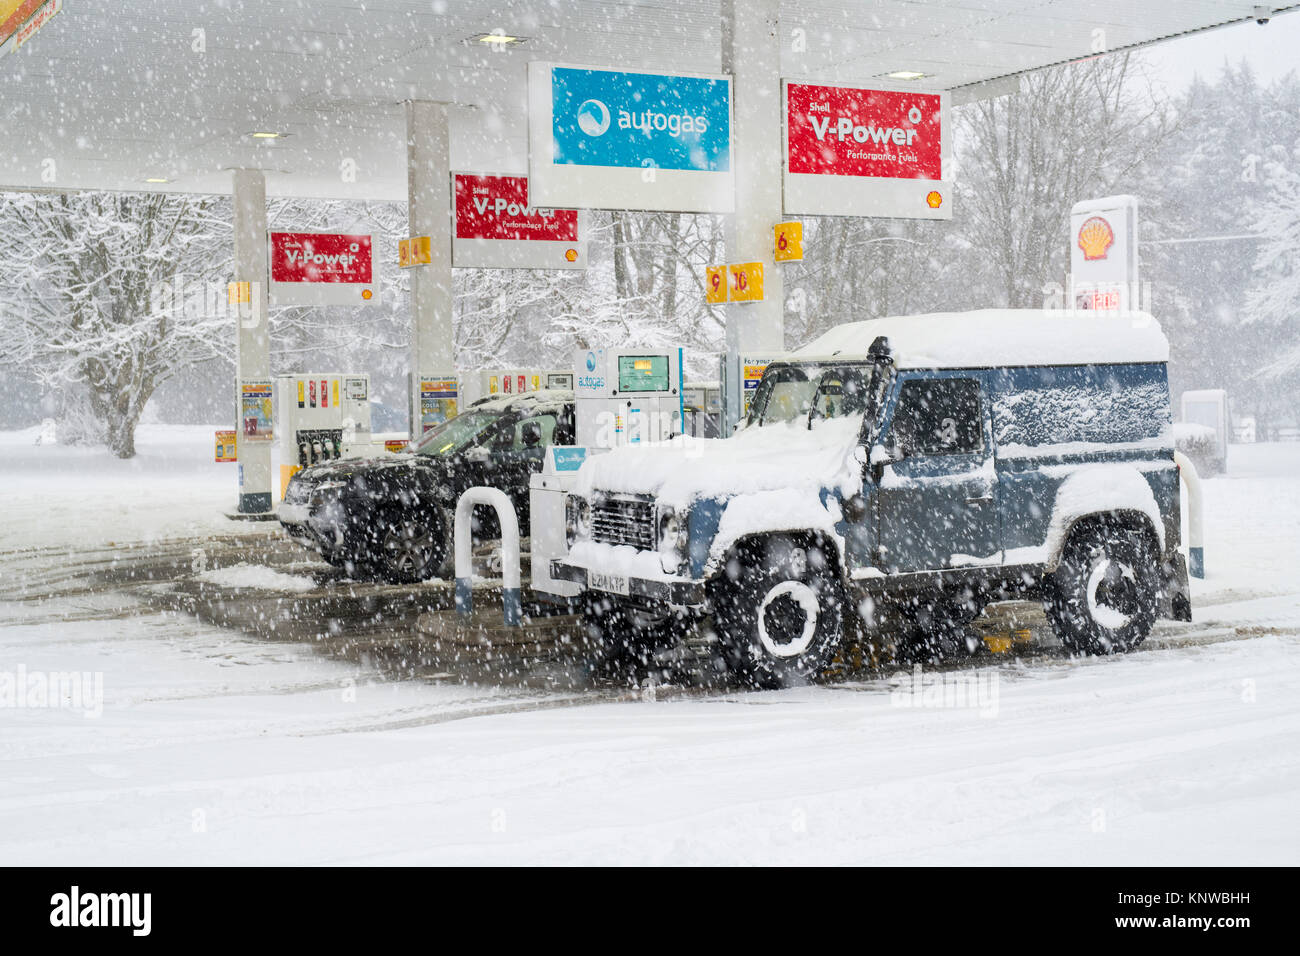 Land Rover and Dacia duster in a petrol station in the snow. Chipping norton, Oxfordshire, England Stock Photo